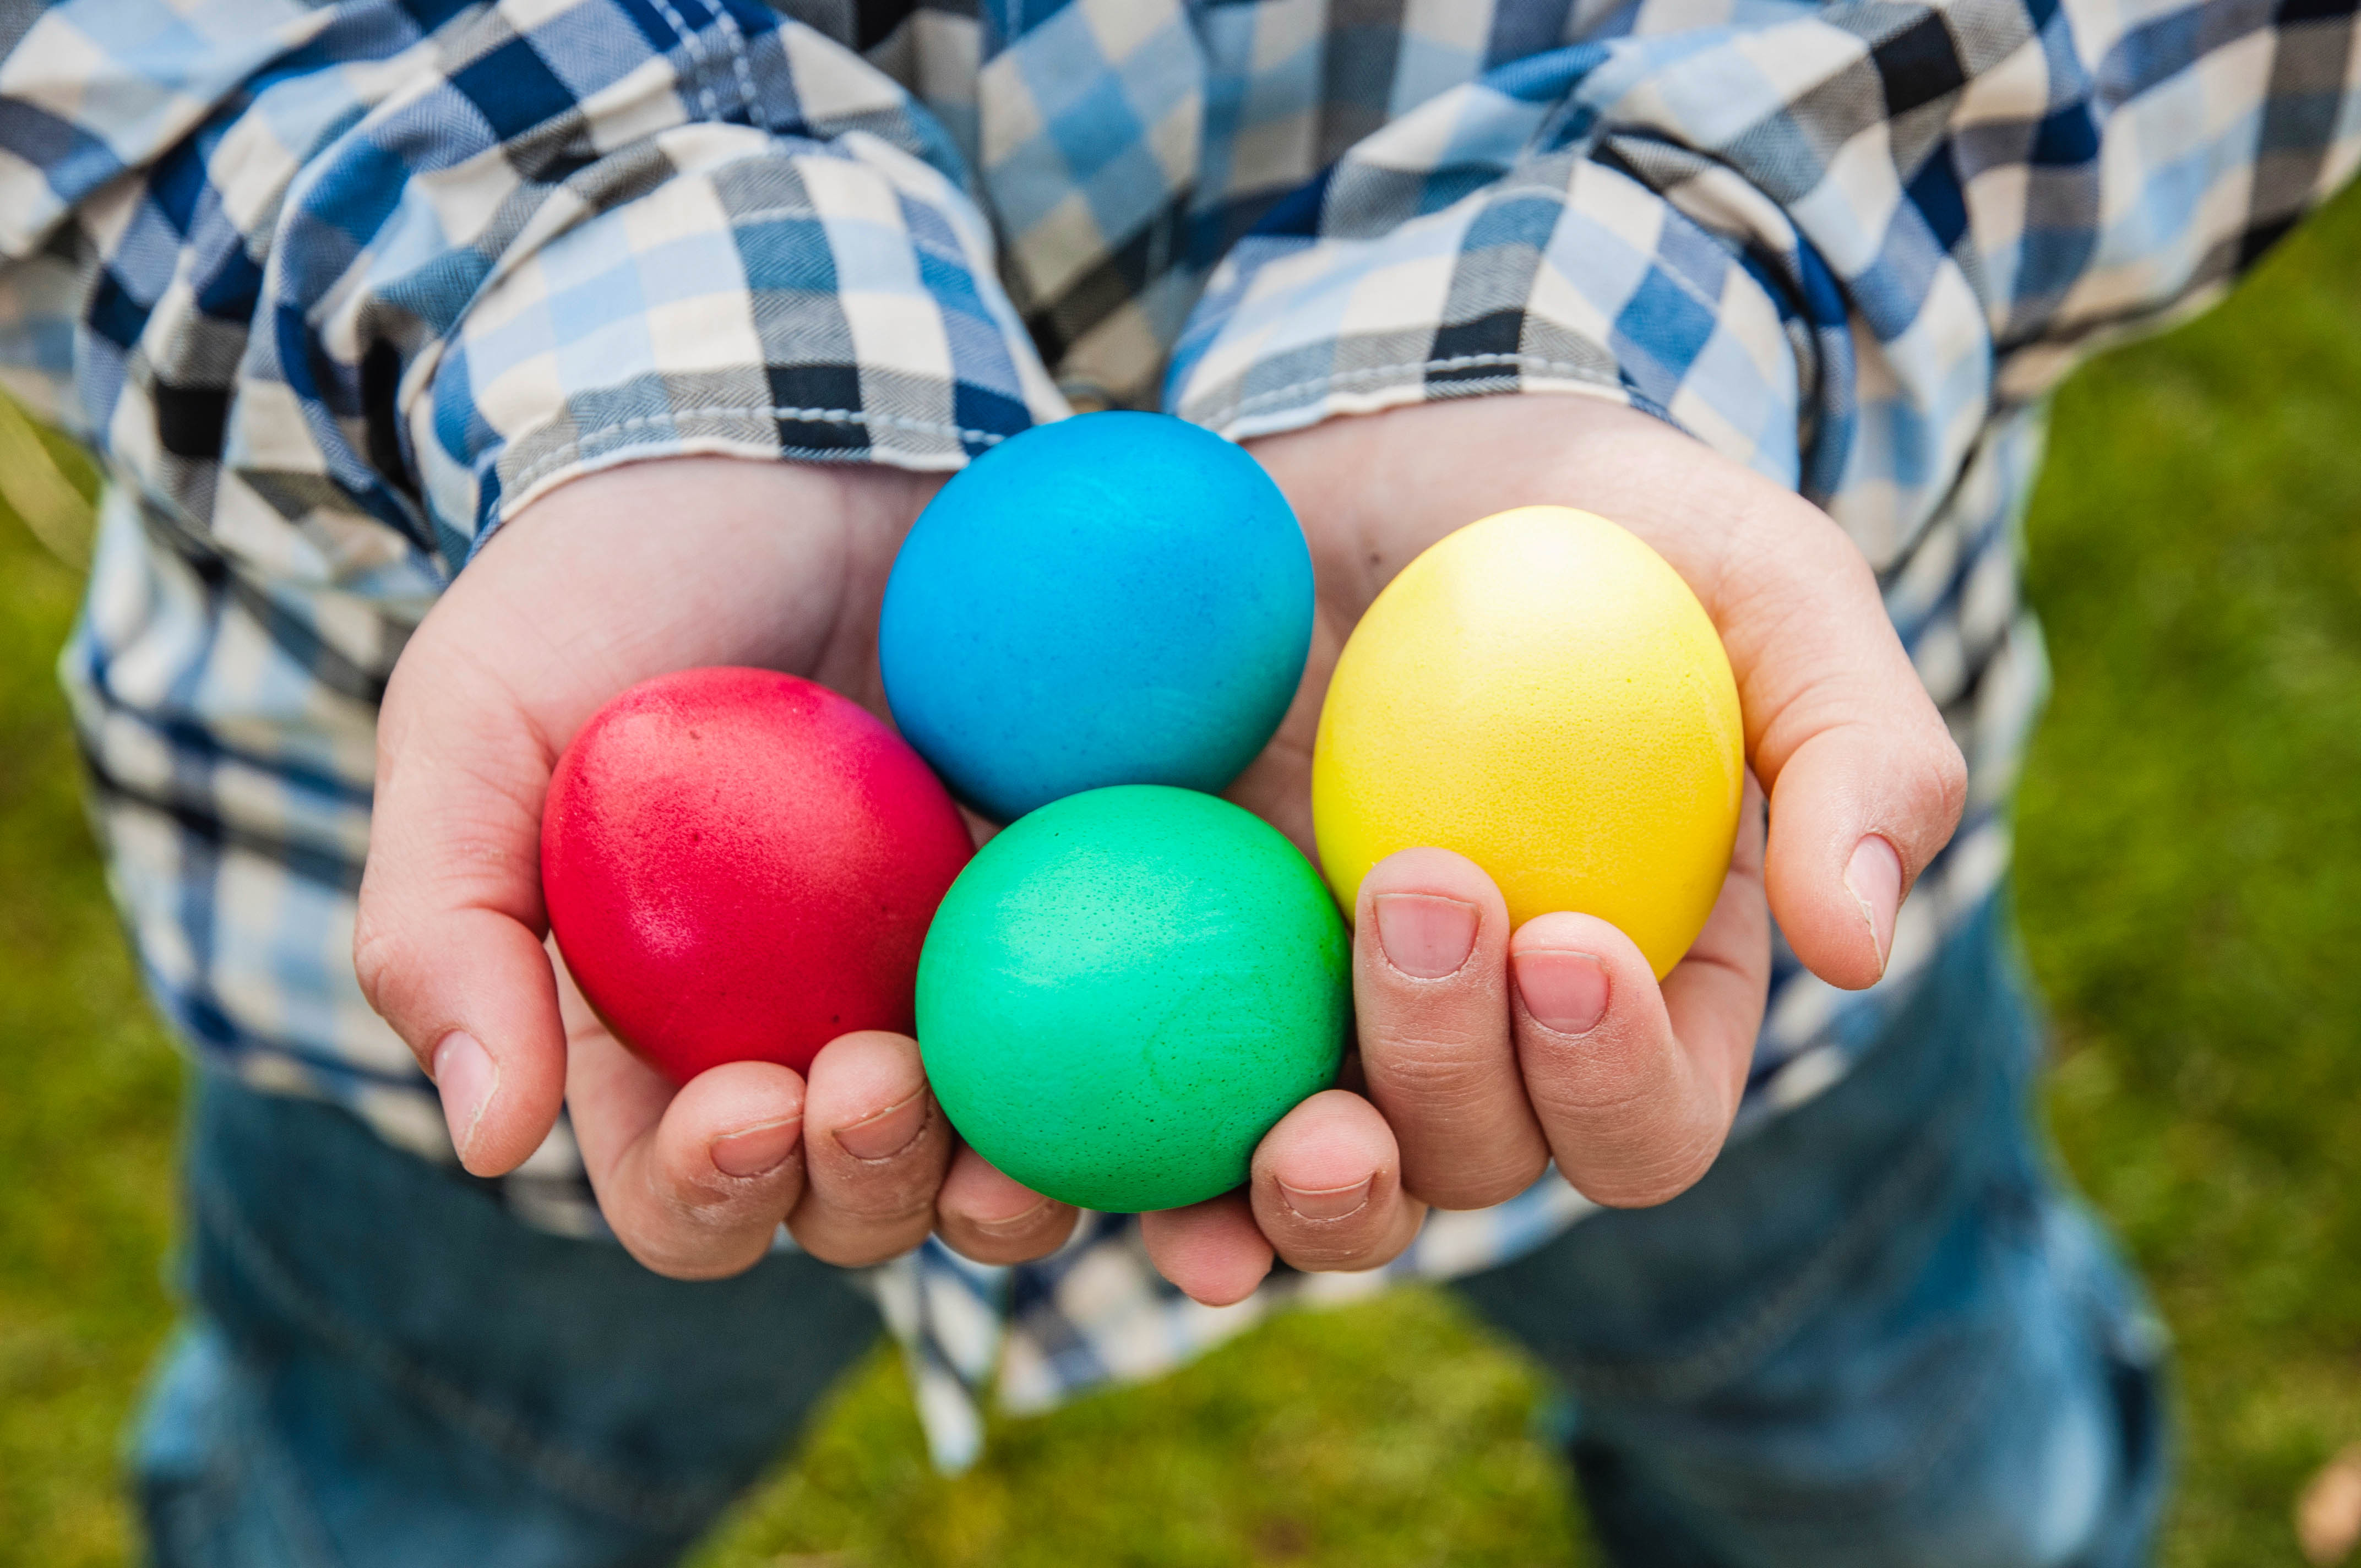 Create and hide unbreakable Easter eggs - Easter is one of the most important days of the year for Christians. Easter Sunday is filled with symbolism and tradition, some of which harken back to early Christianity, while others trace their origins to paganism.